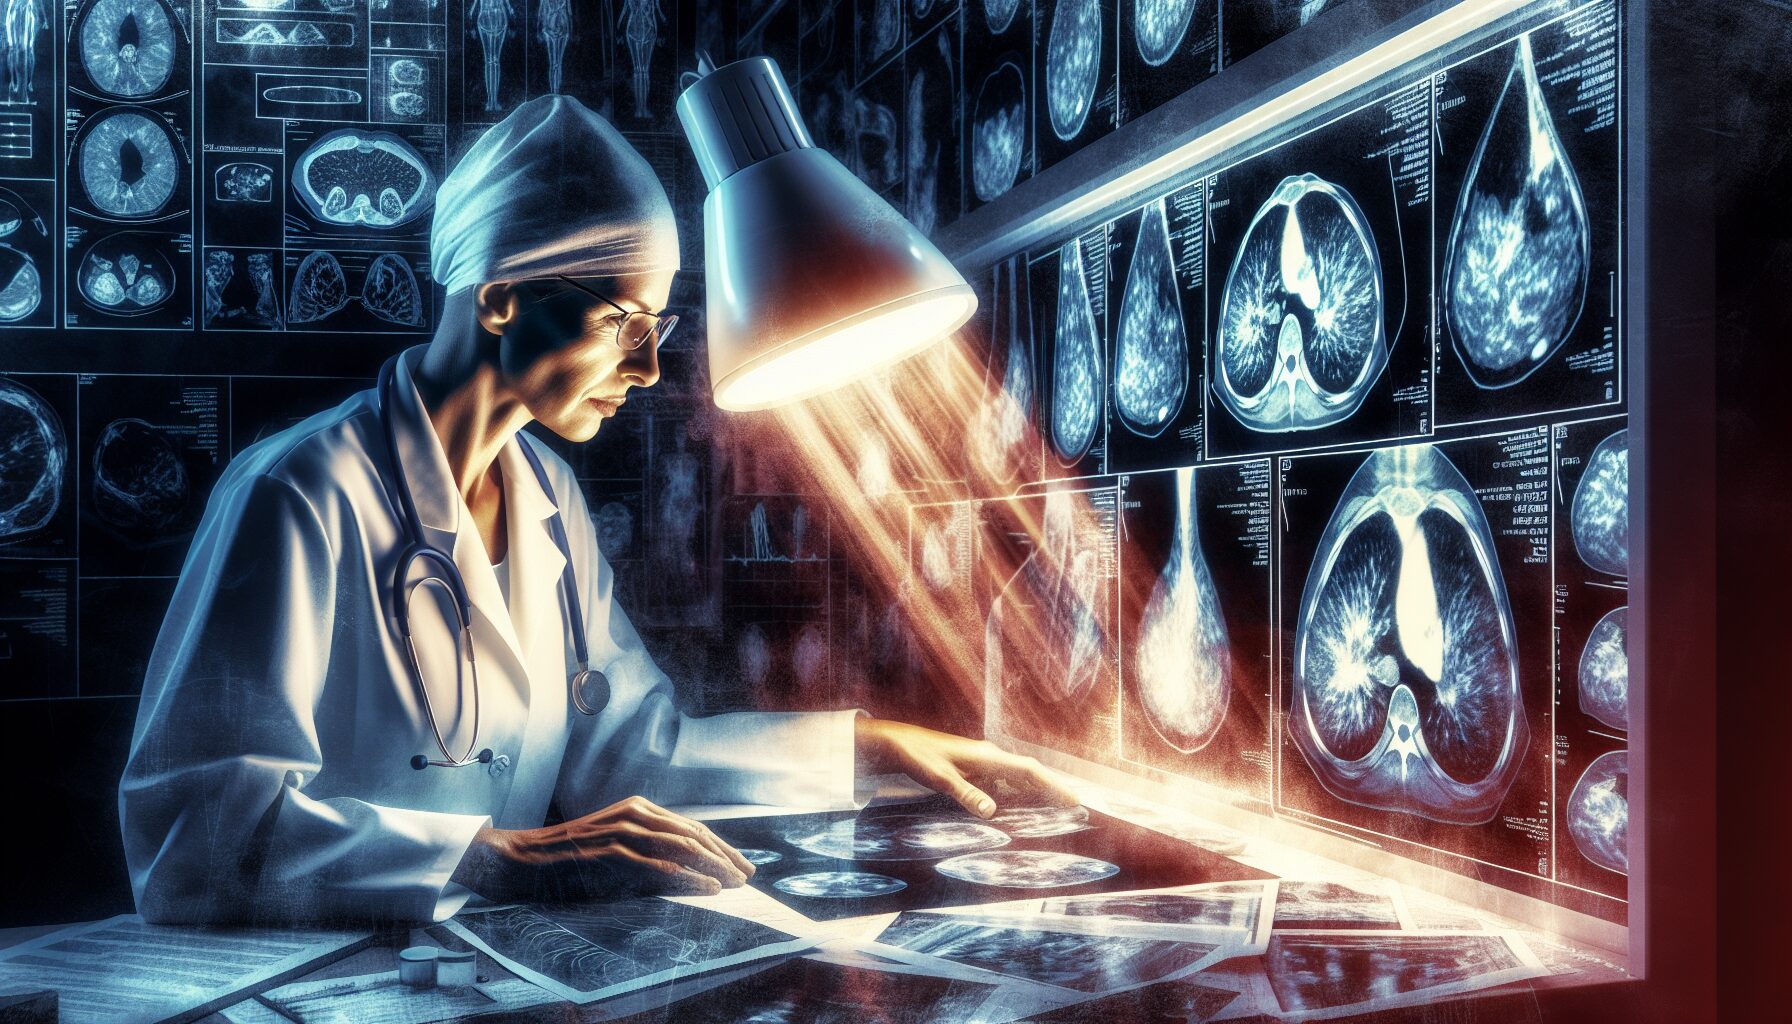 Artistic depiction of a medical professional reviewing test results for breast cancer